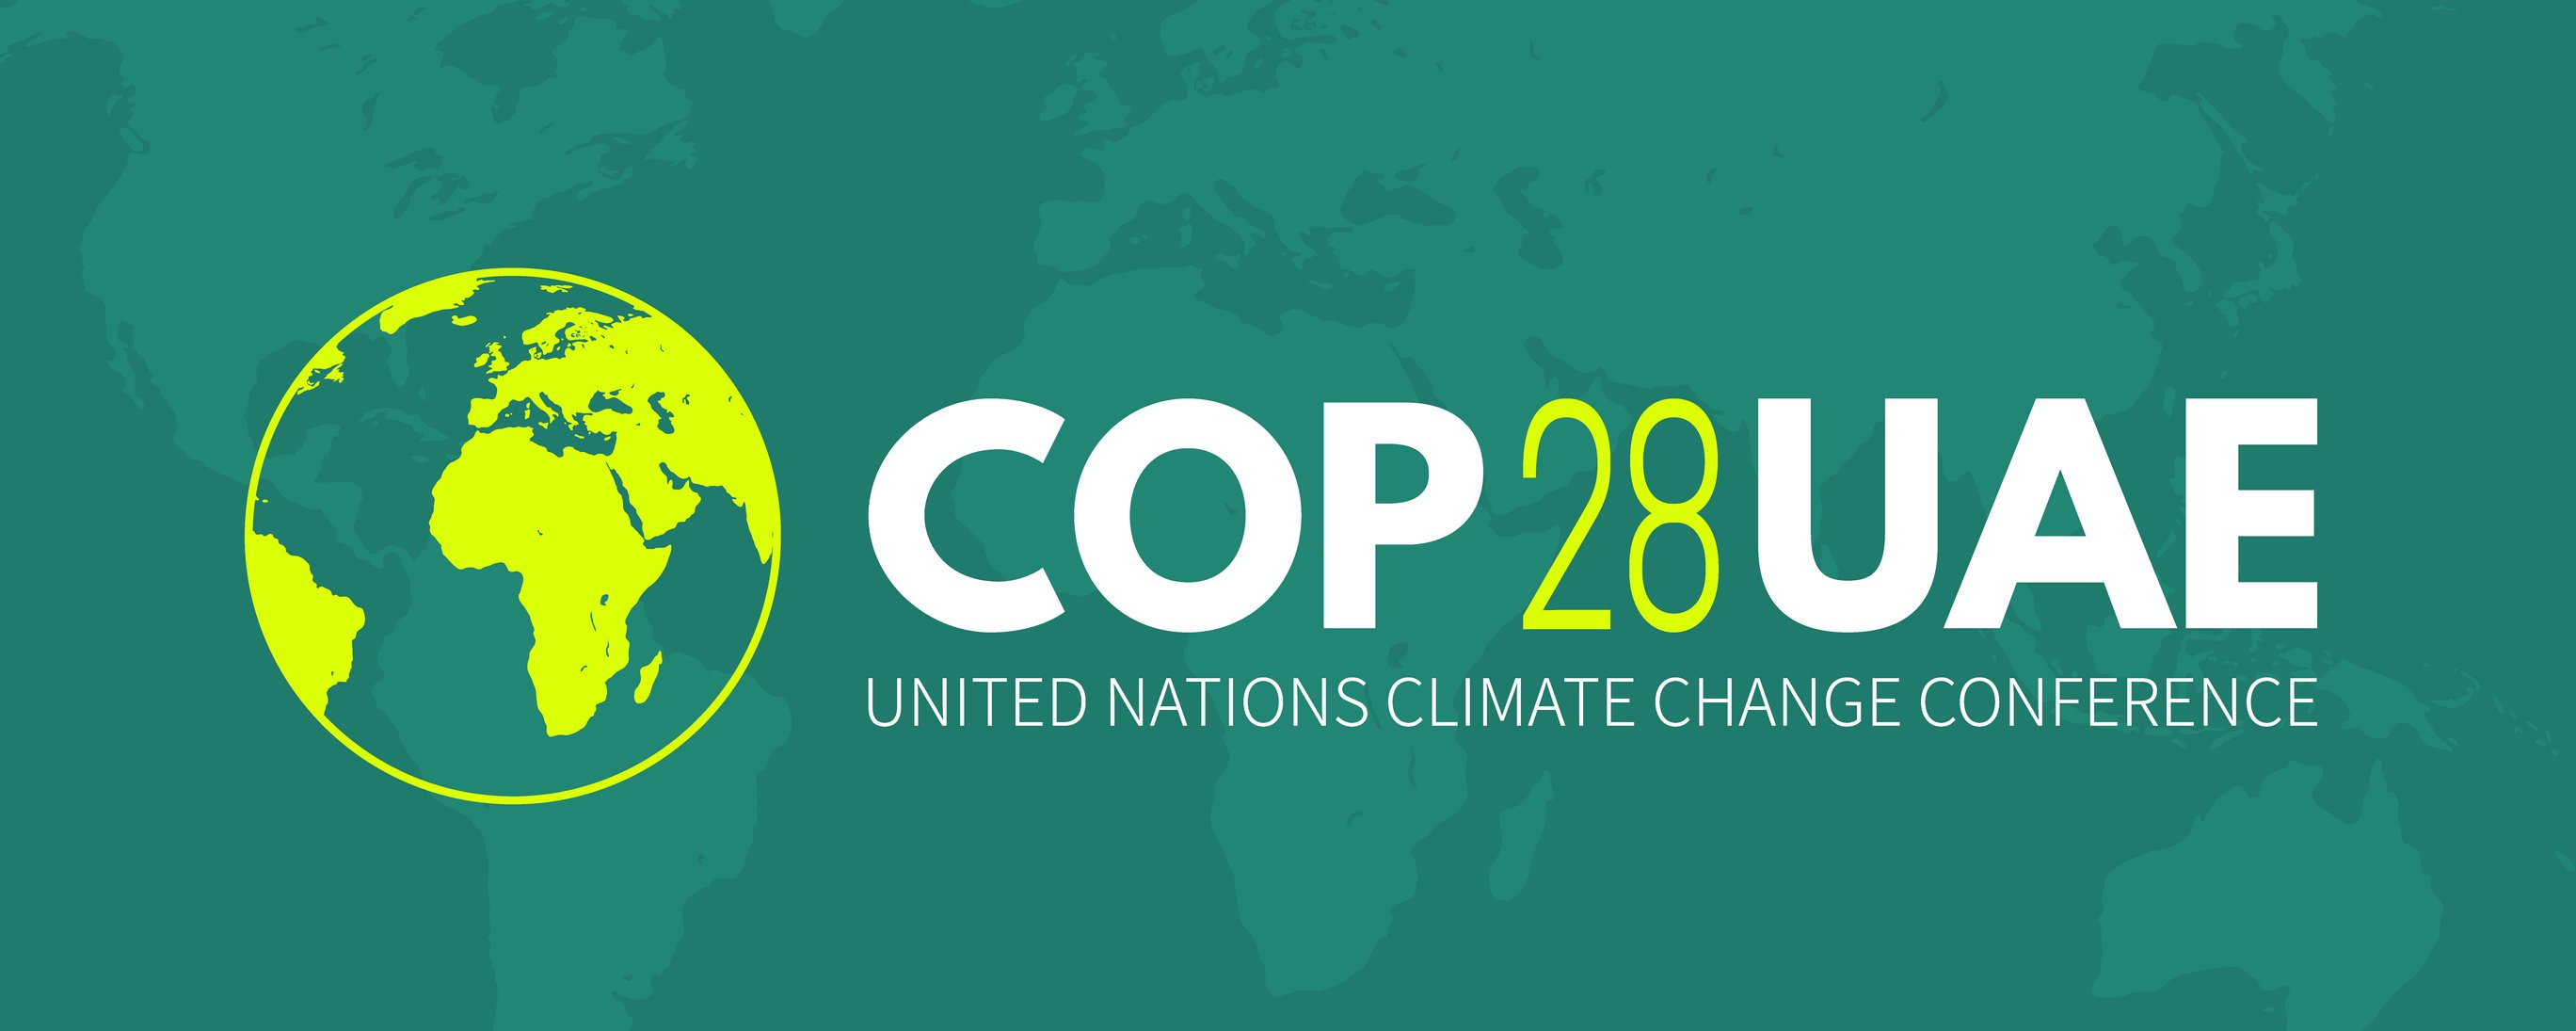 COP28 logo in the form of a banner.